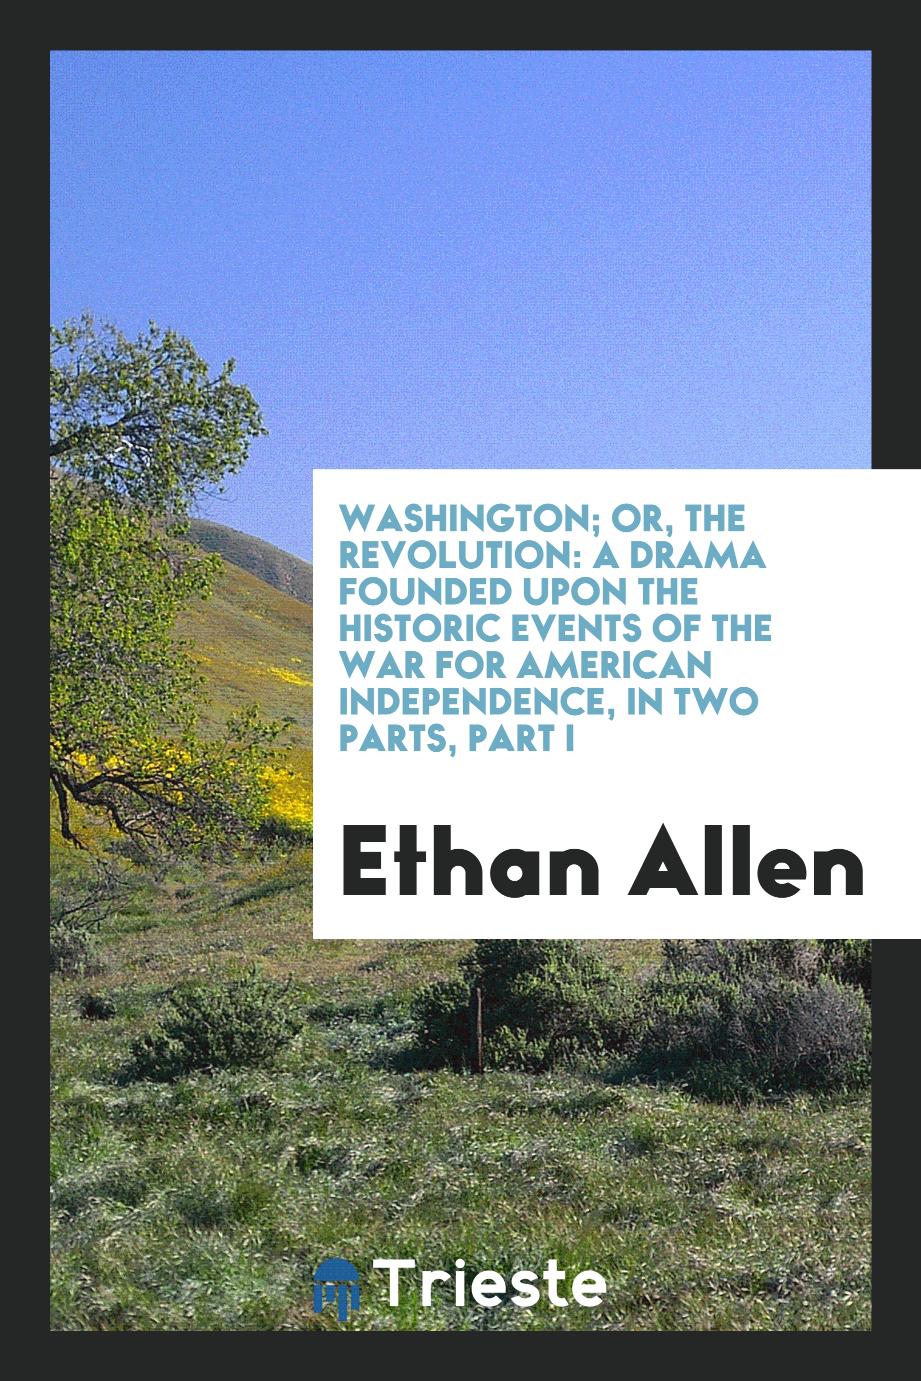 Washington; or, The revolution: a drama founded upon the historic events of the war for American Independence, in two parts, Part I